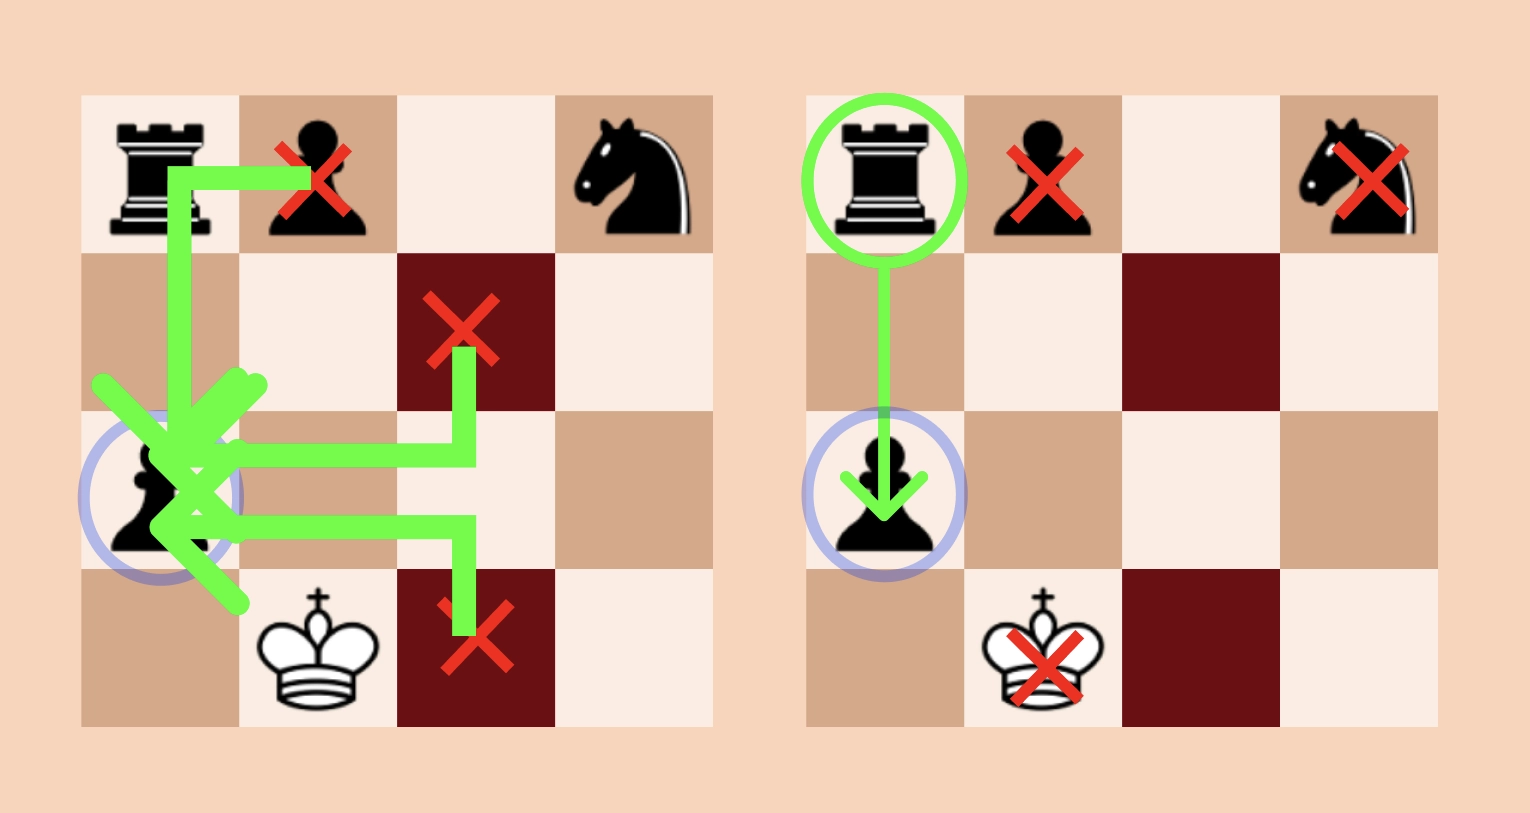 Echo Chess: The Quest for Solvability